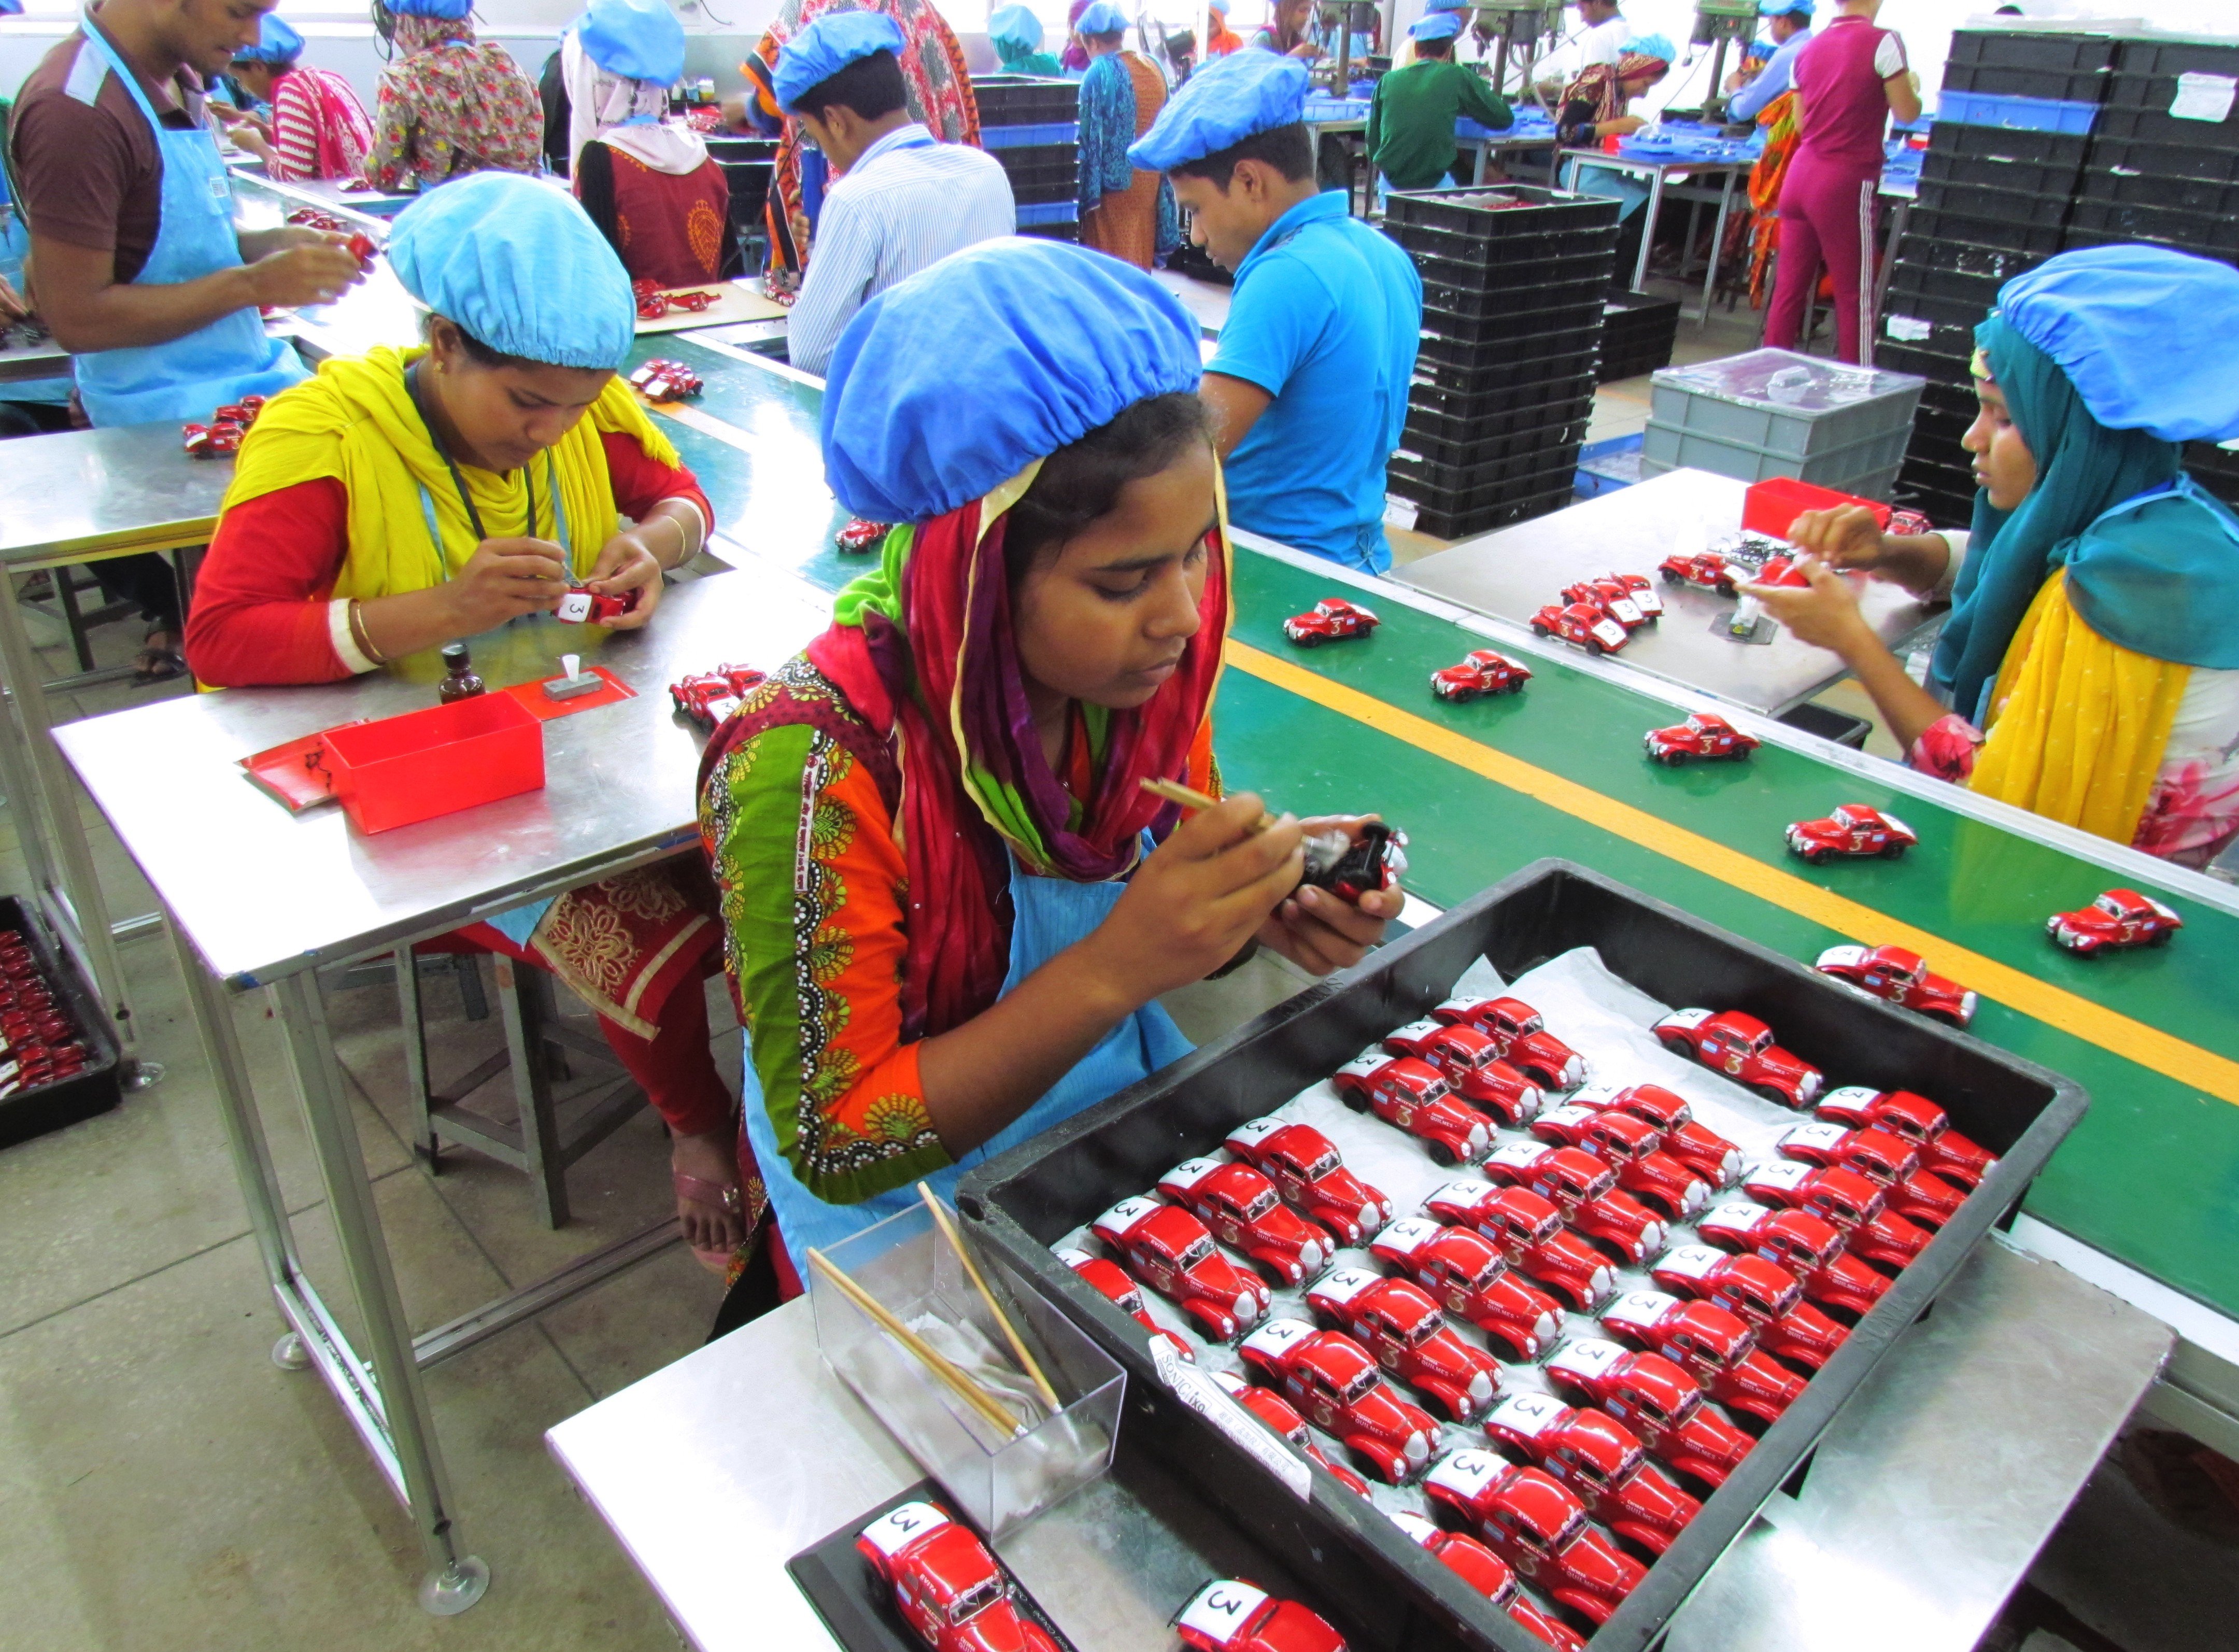 Workers at a Chinese-run factory in Bangladesh produce 12 million toys a year. Photo: Phila Siu